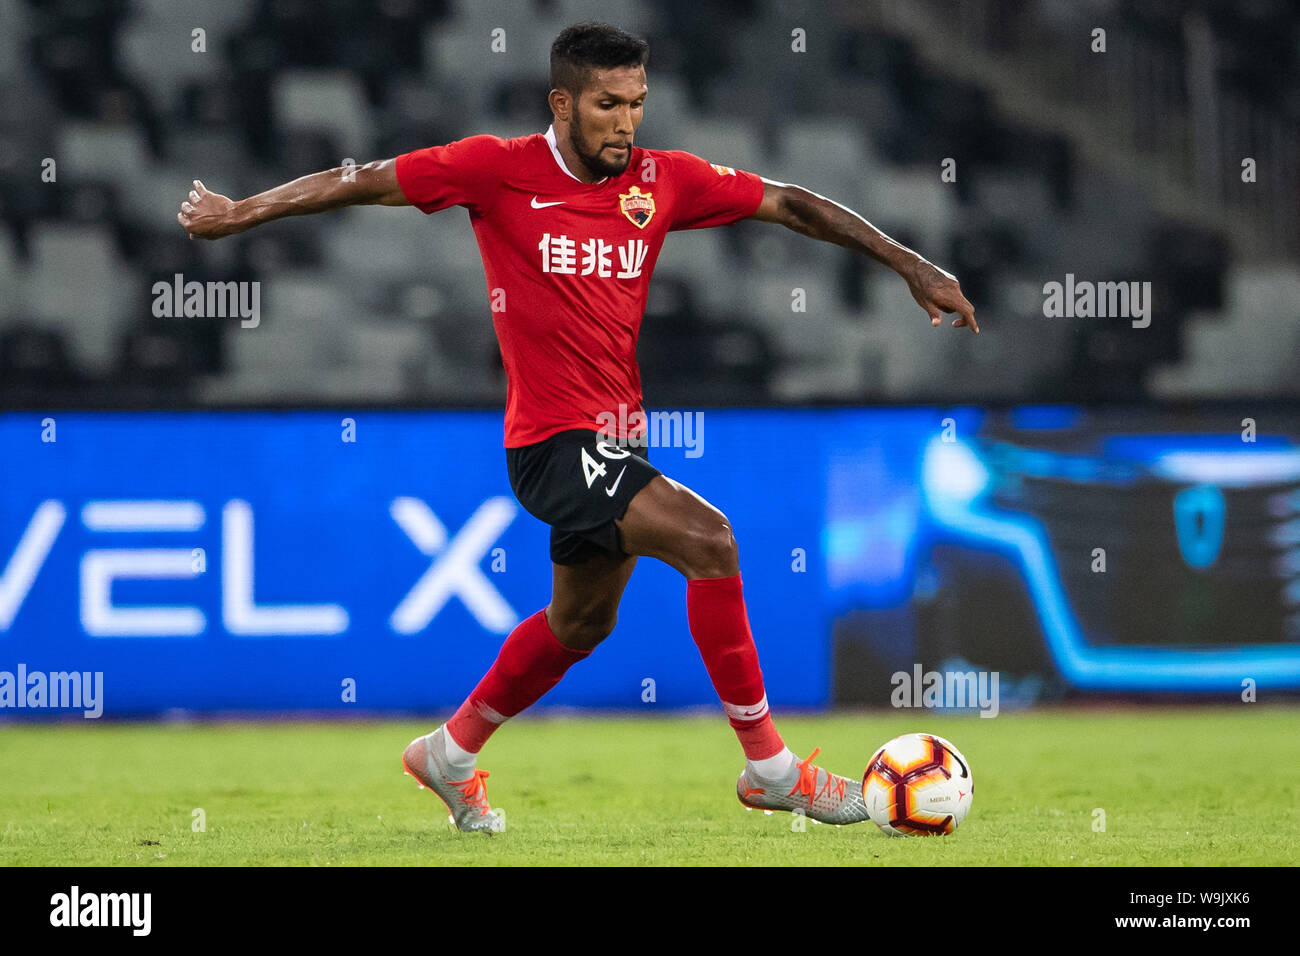 Brazilian-born Portuguese football player Dyego Sousa of Shenzhen F.C., chases after the ball in the 22nd round match during the 2019 Chinese Football Association Super League (CSL) in Shenzhen city, Guandong province, China, 14 August 2019. Stock Photo